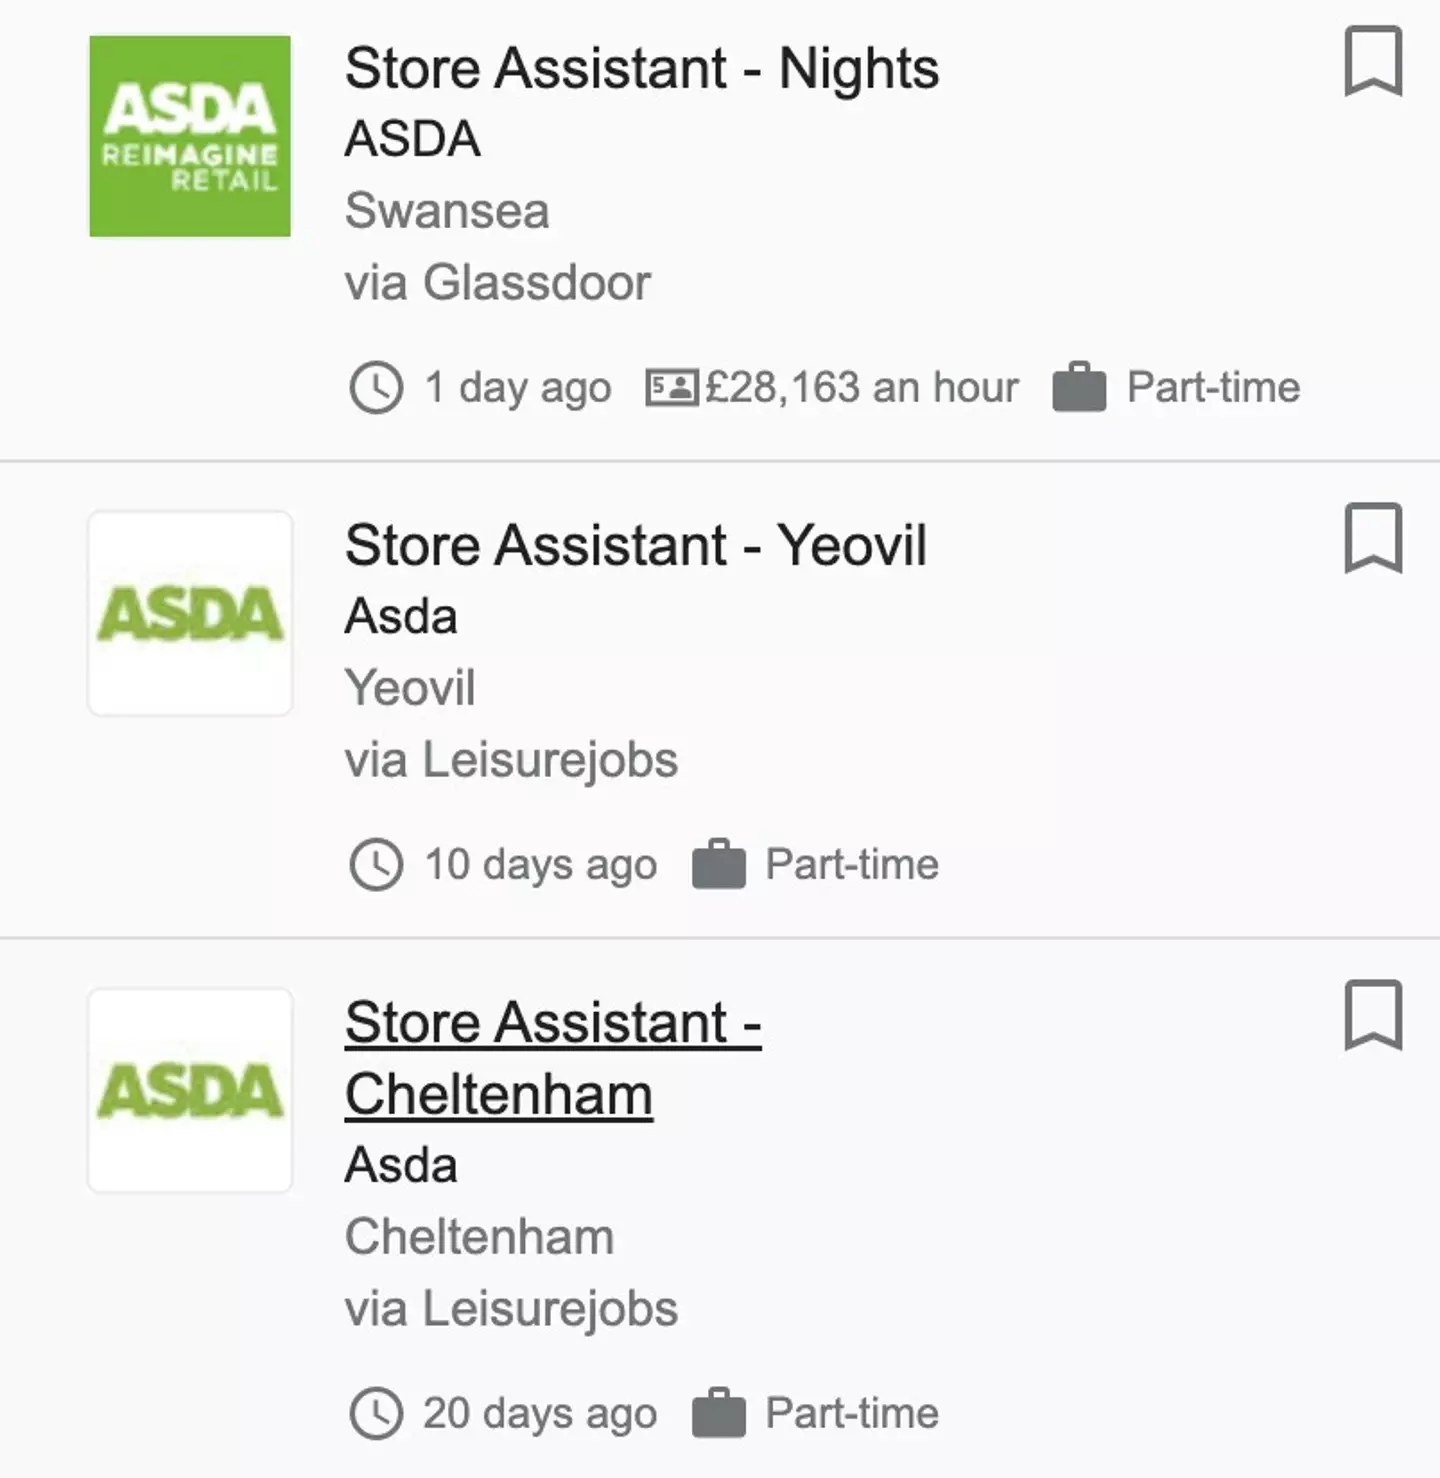 Sure you'd have to work nights in a Swansea ASDA, but £28,163 an hour is nothing to be sniffed at.